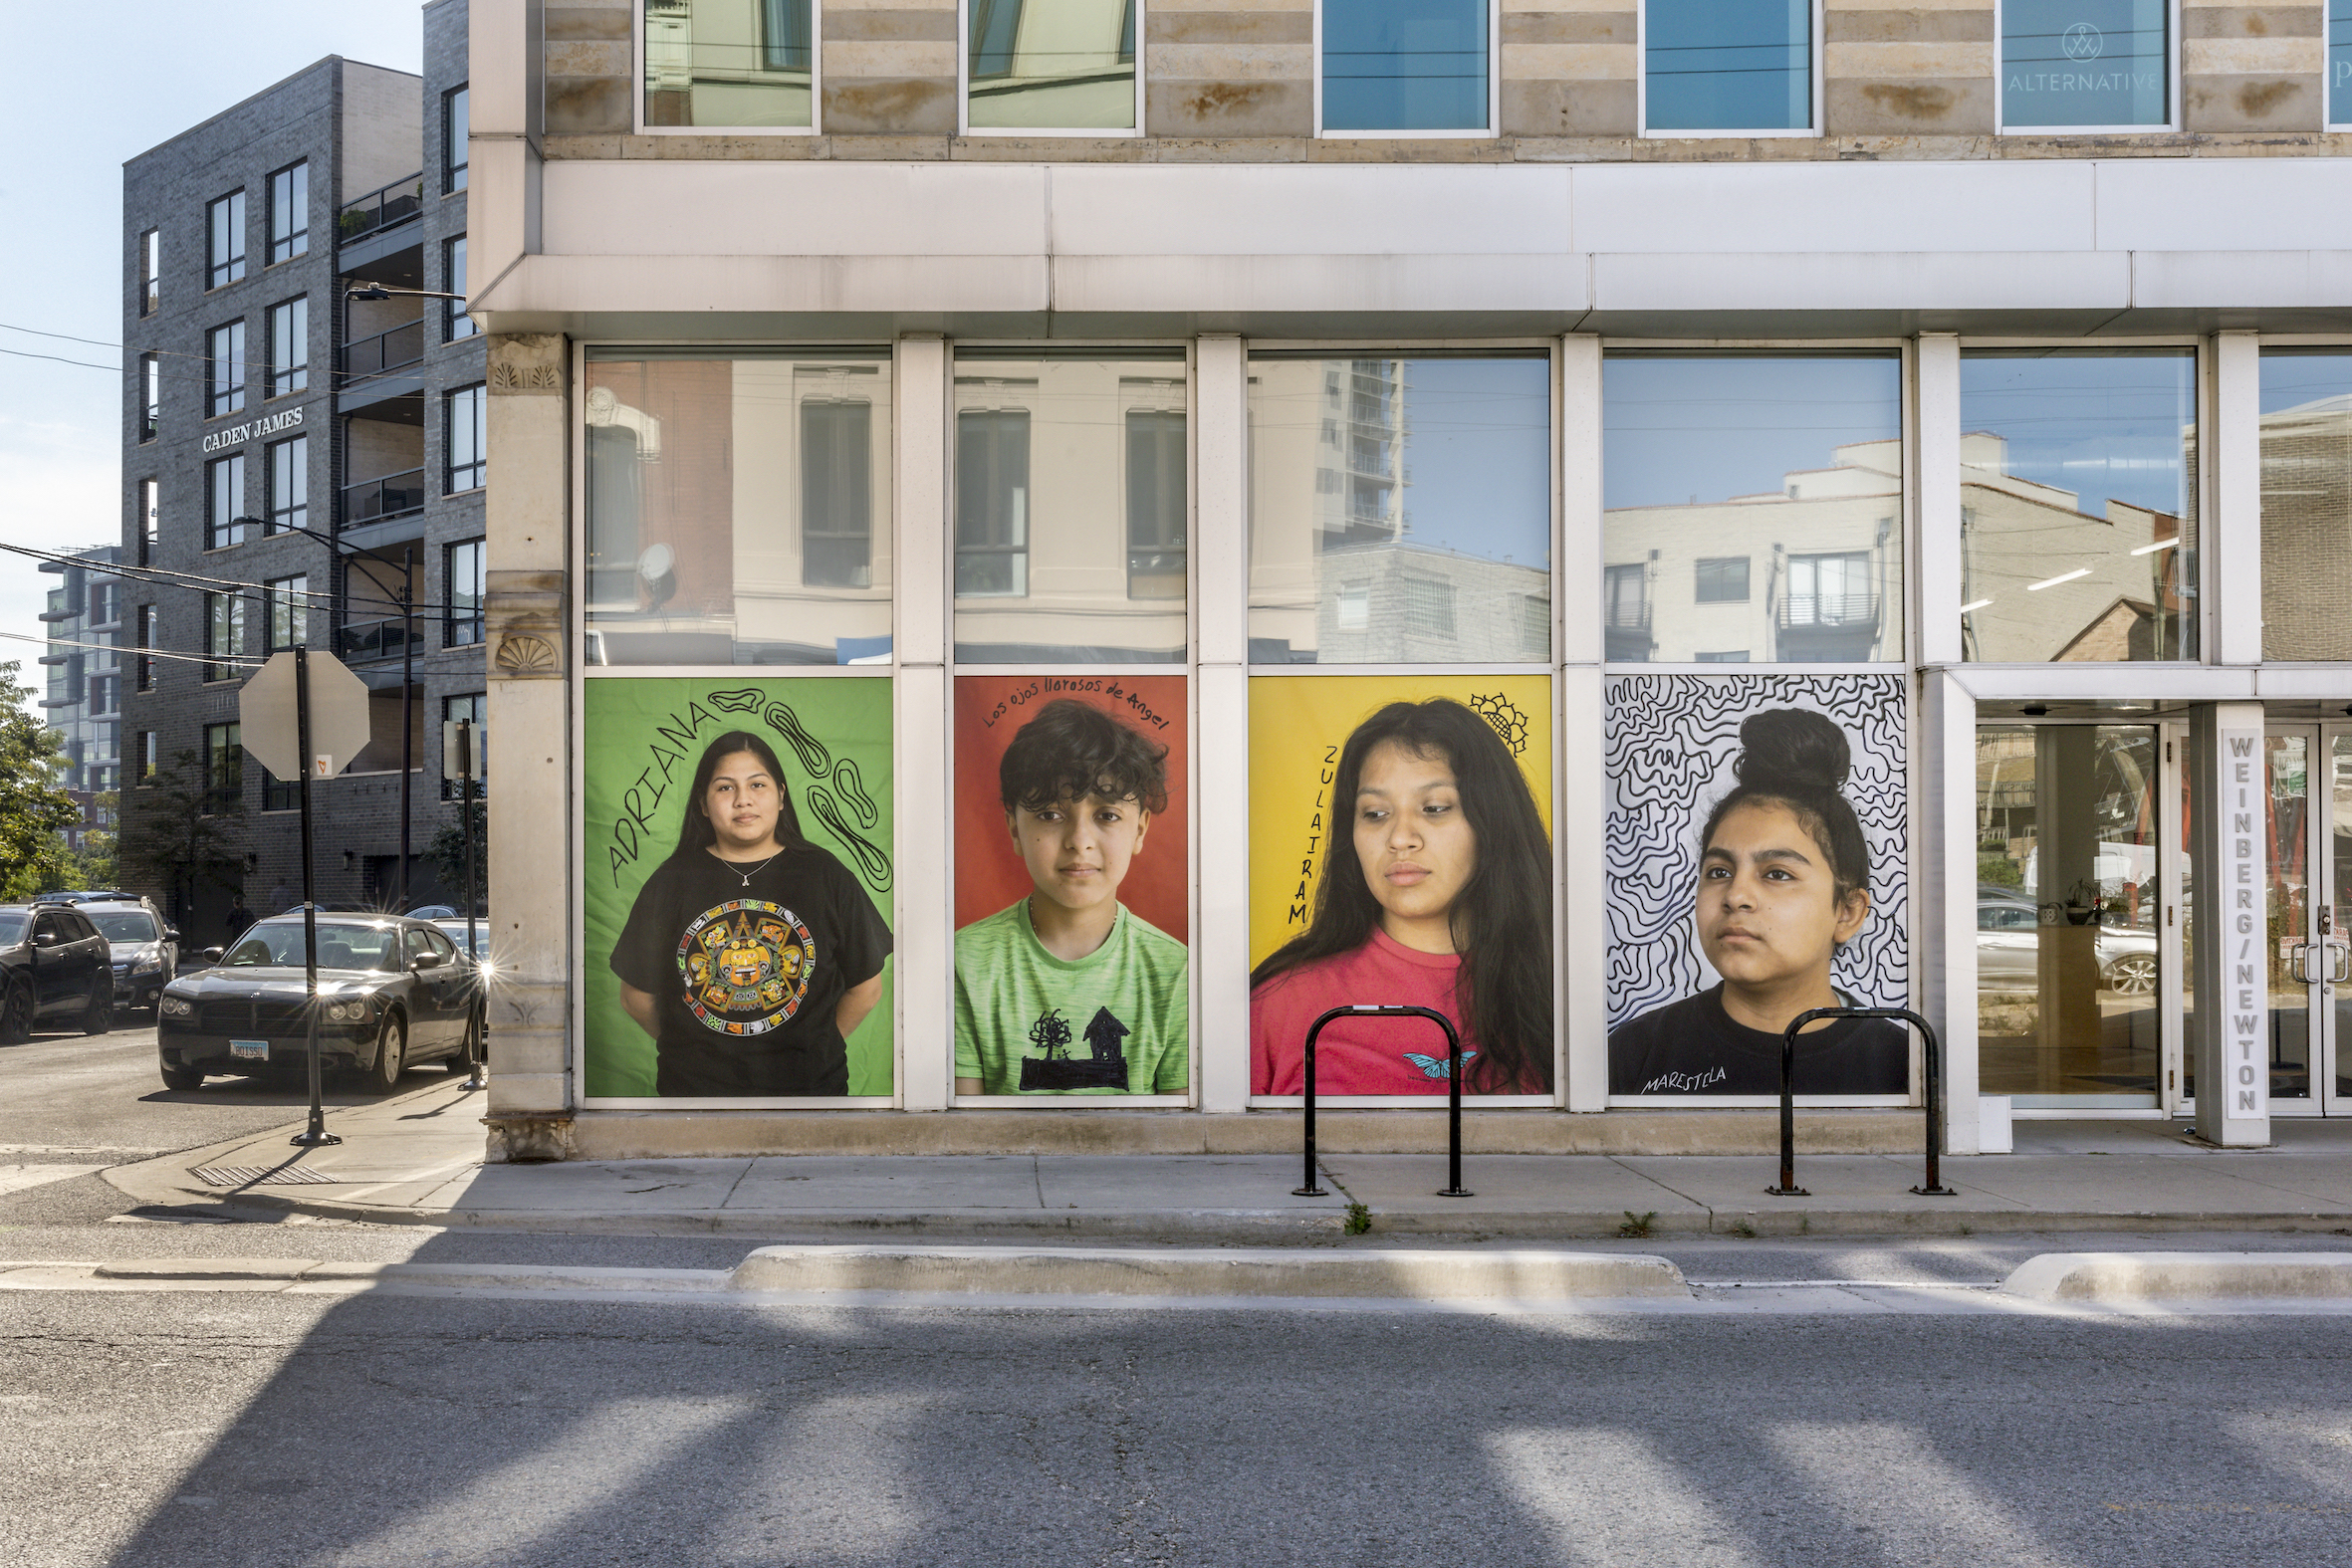 An exterior photograph of the Weinberg/Newton Gallery, Chicago, showing four portrait photographs by Wendy Ewald displayed in the gallery windows.